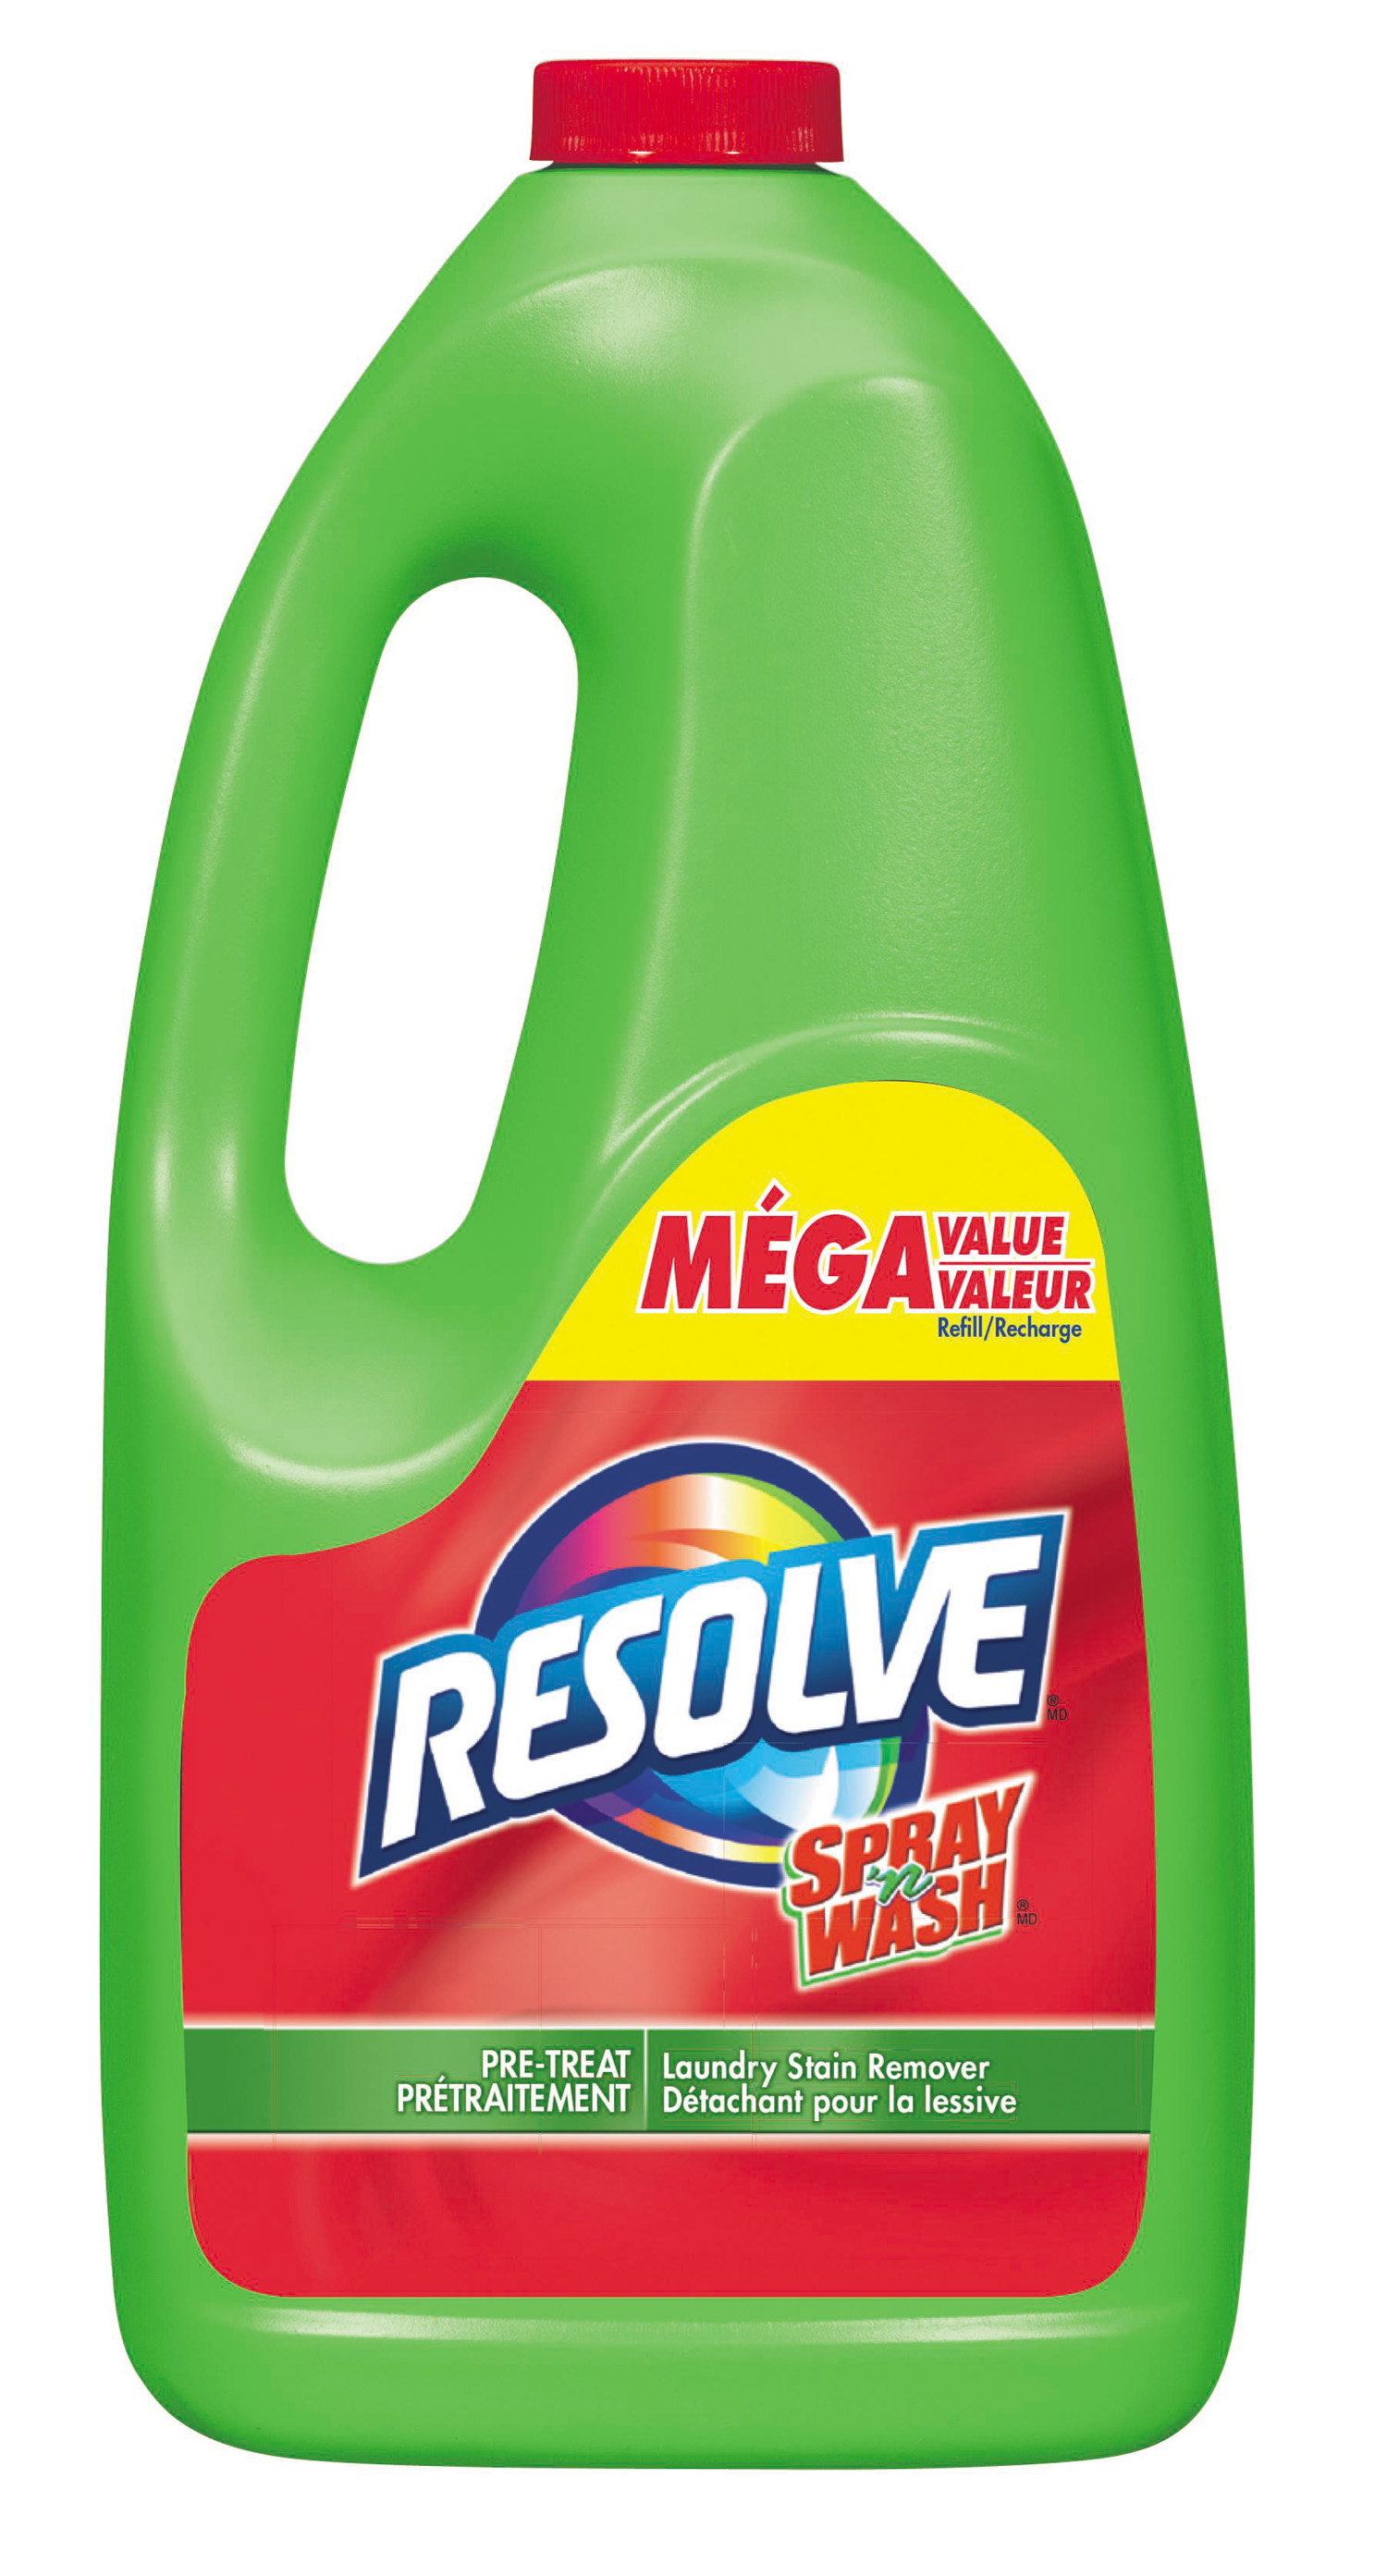 RESOLVE® Spray 'n Wash® Pre-Treat Laundry Stain Remover - Refill (Canada)